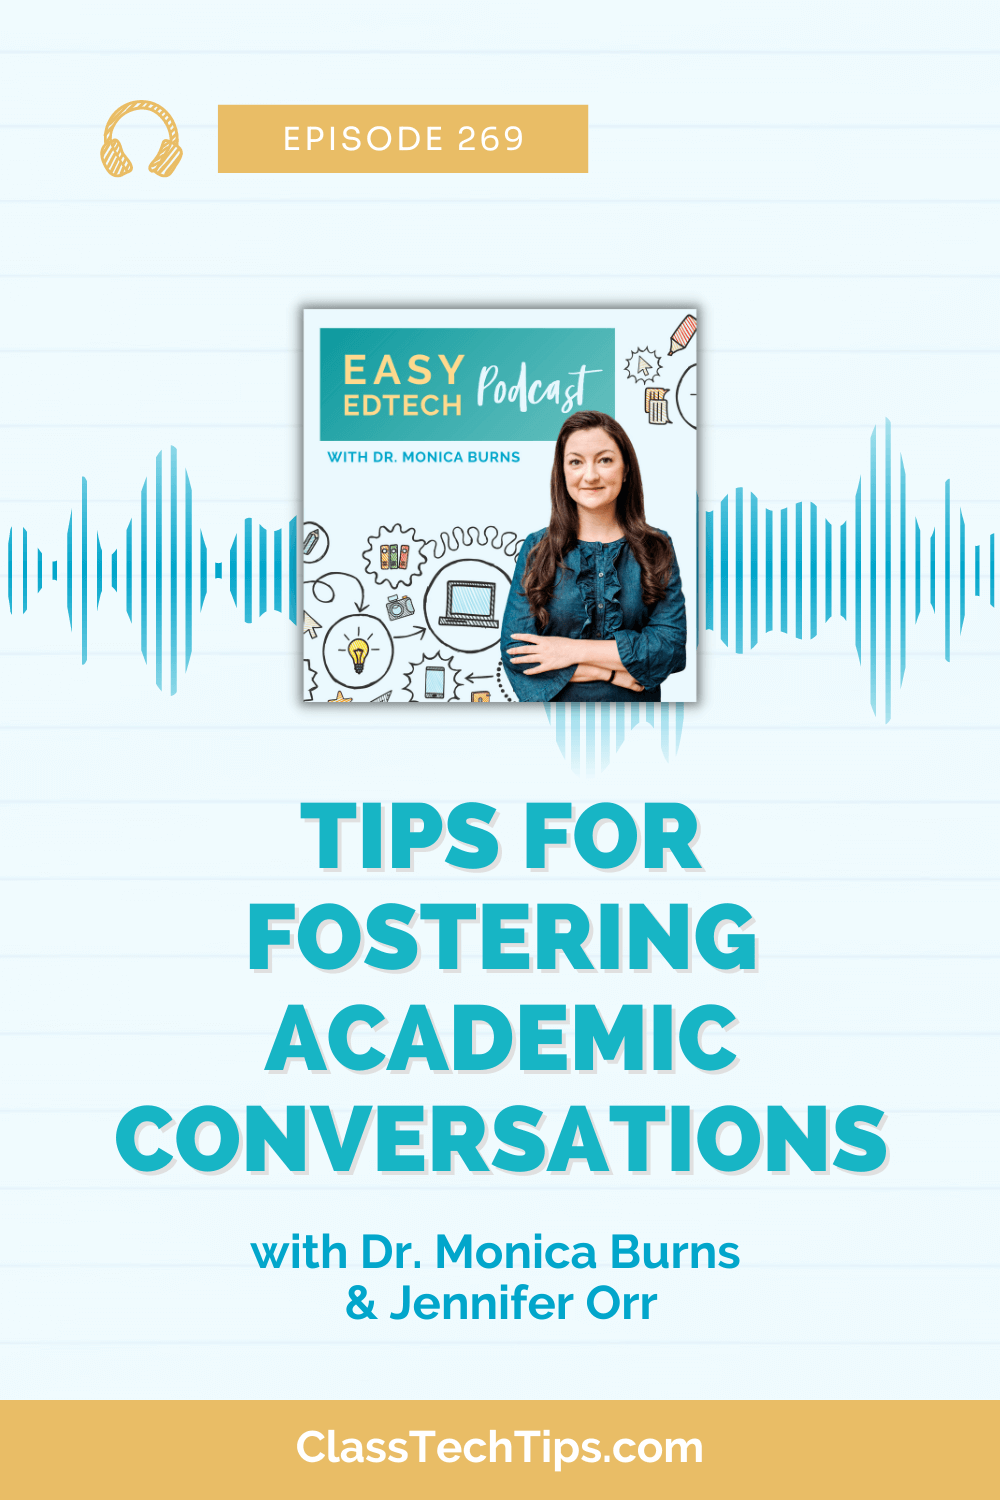 Easy EdTech Podcast Episode 269 cover image featuring Dr. Monica Burns and Jennifer Orr discussing tips for fostering academic conversations in K-12 classrooms.